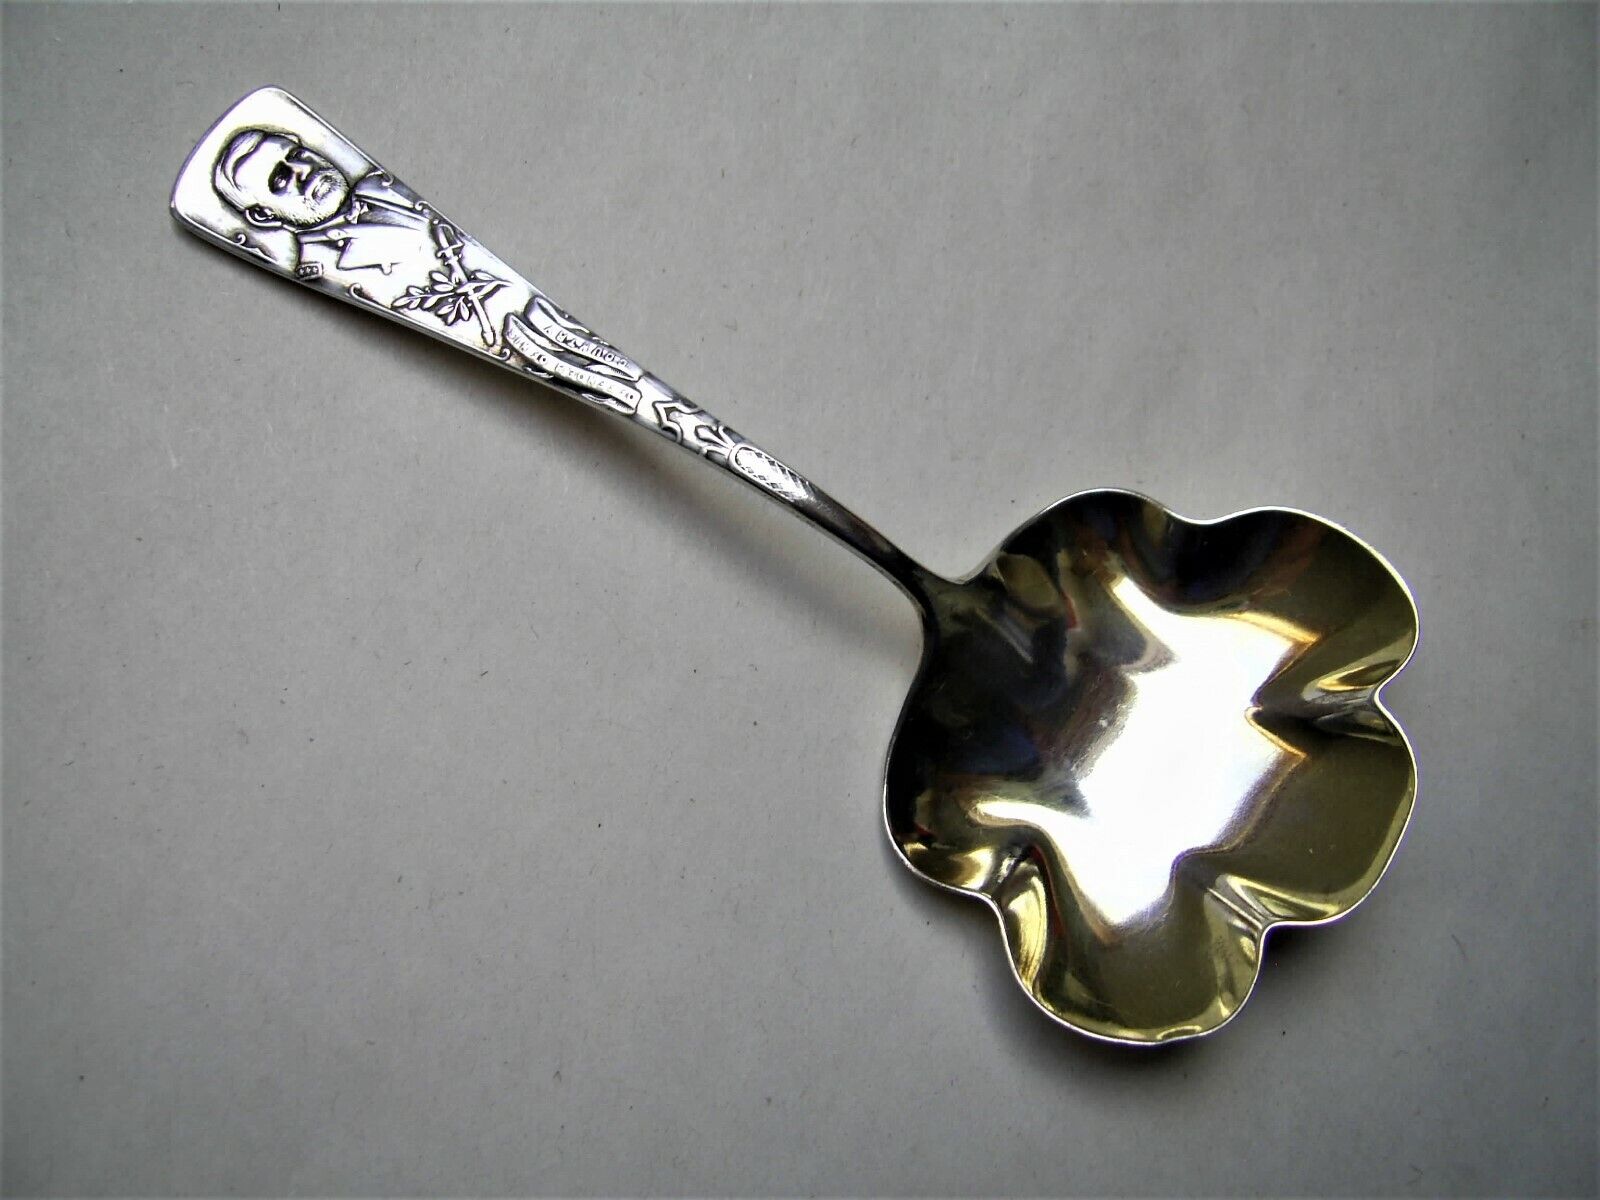 Antique Valuations: ANTIQUE STERLING SILVER CADDY SPOON WITH ULYSSES S GRANT HANDLE